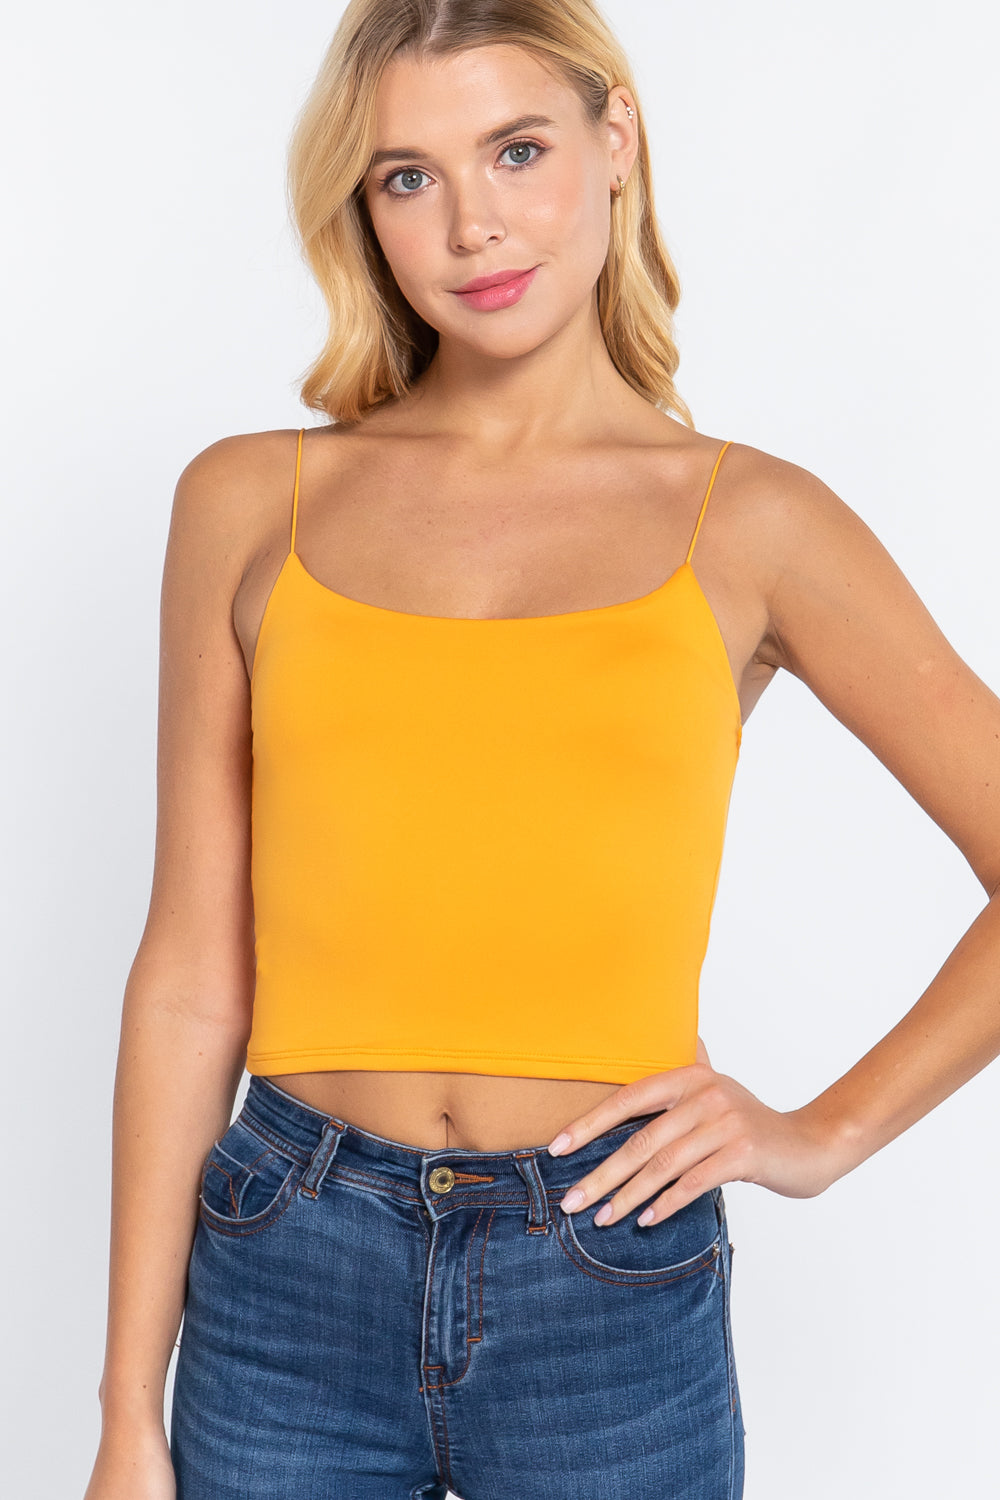 MANGO SHERBET Elastic Strap Two Ply Dty Brushed Knit Cami Top - Ships from The USA - women's cami at TFC&H Co.